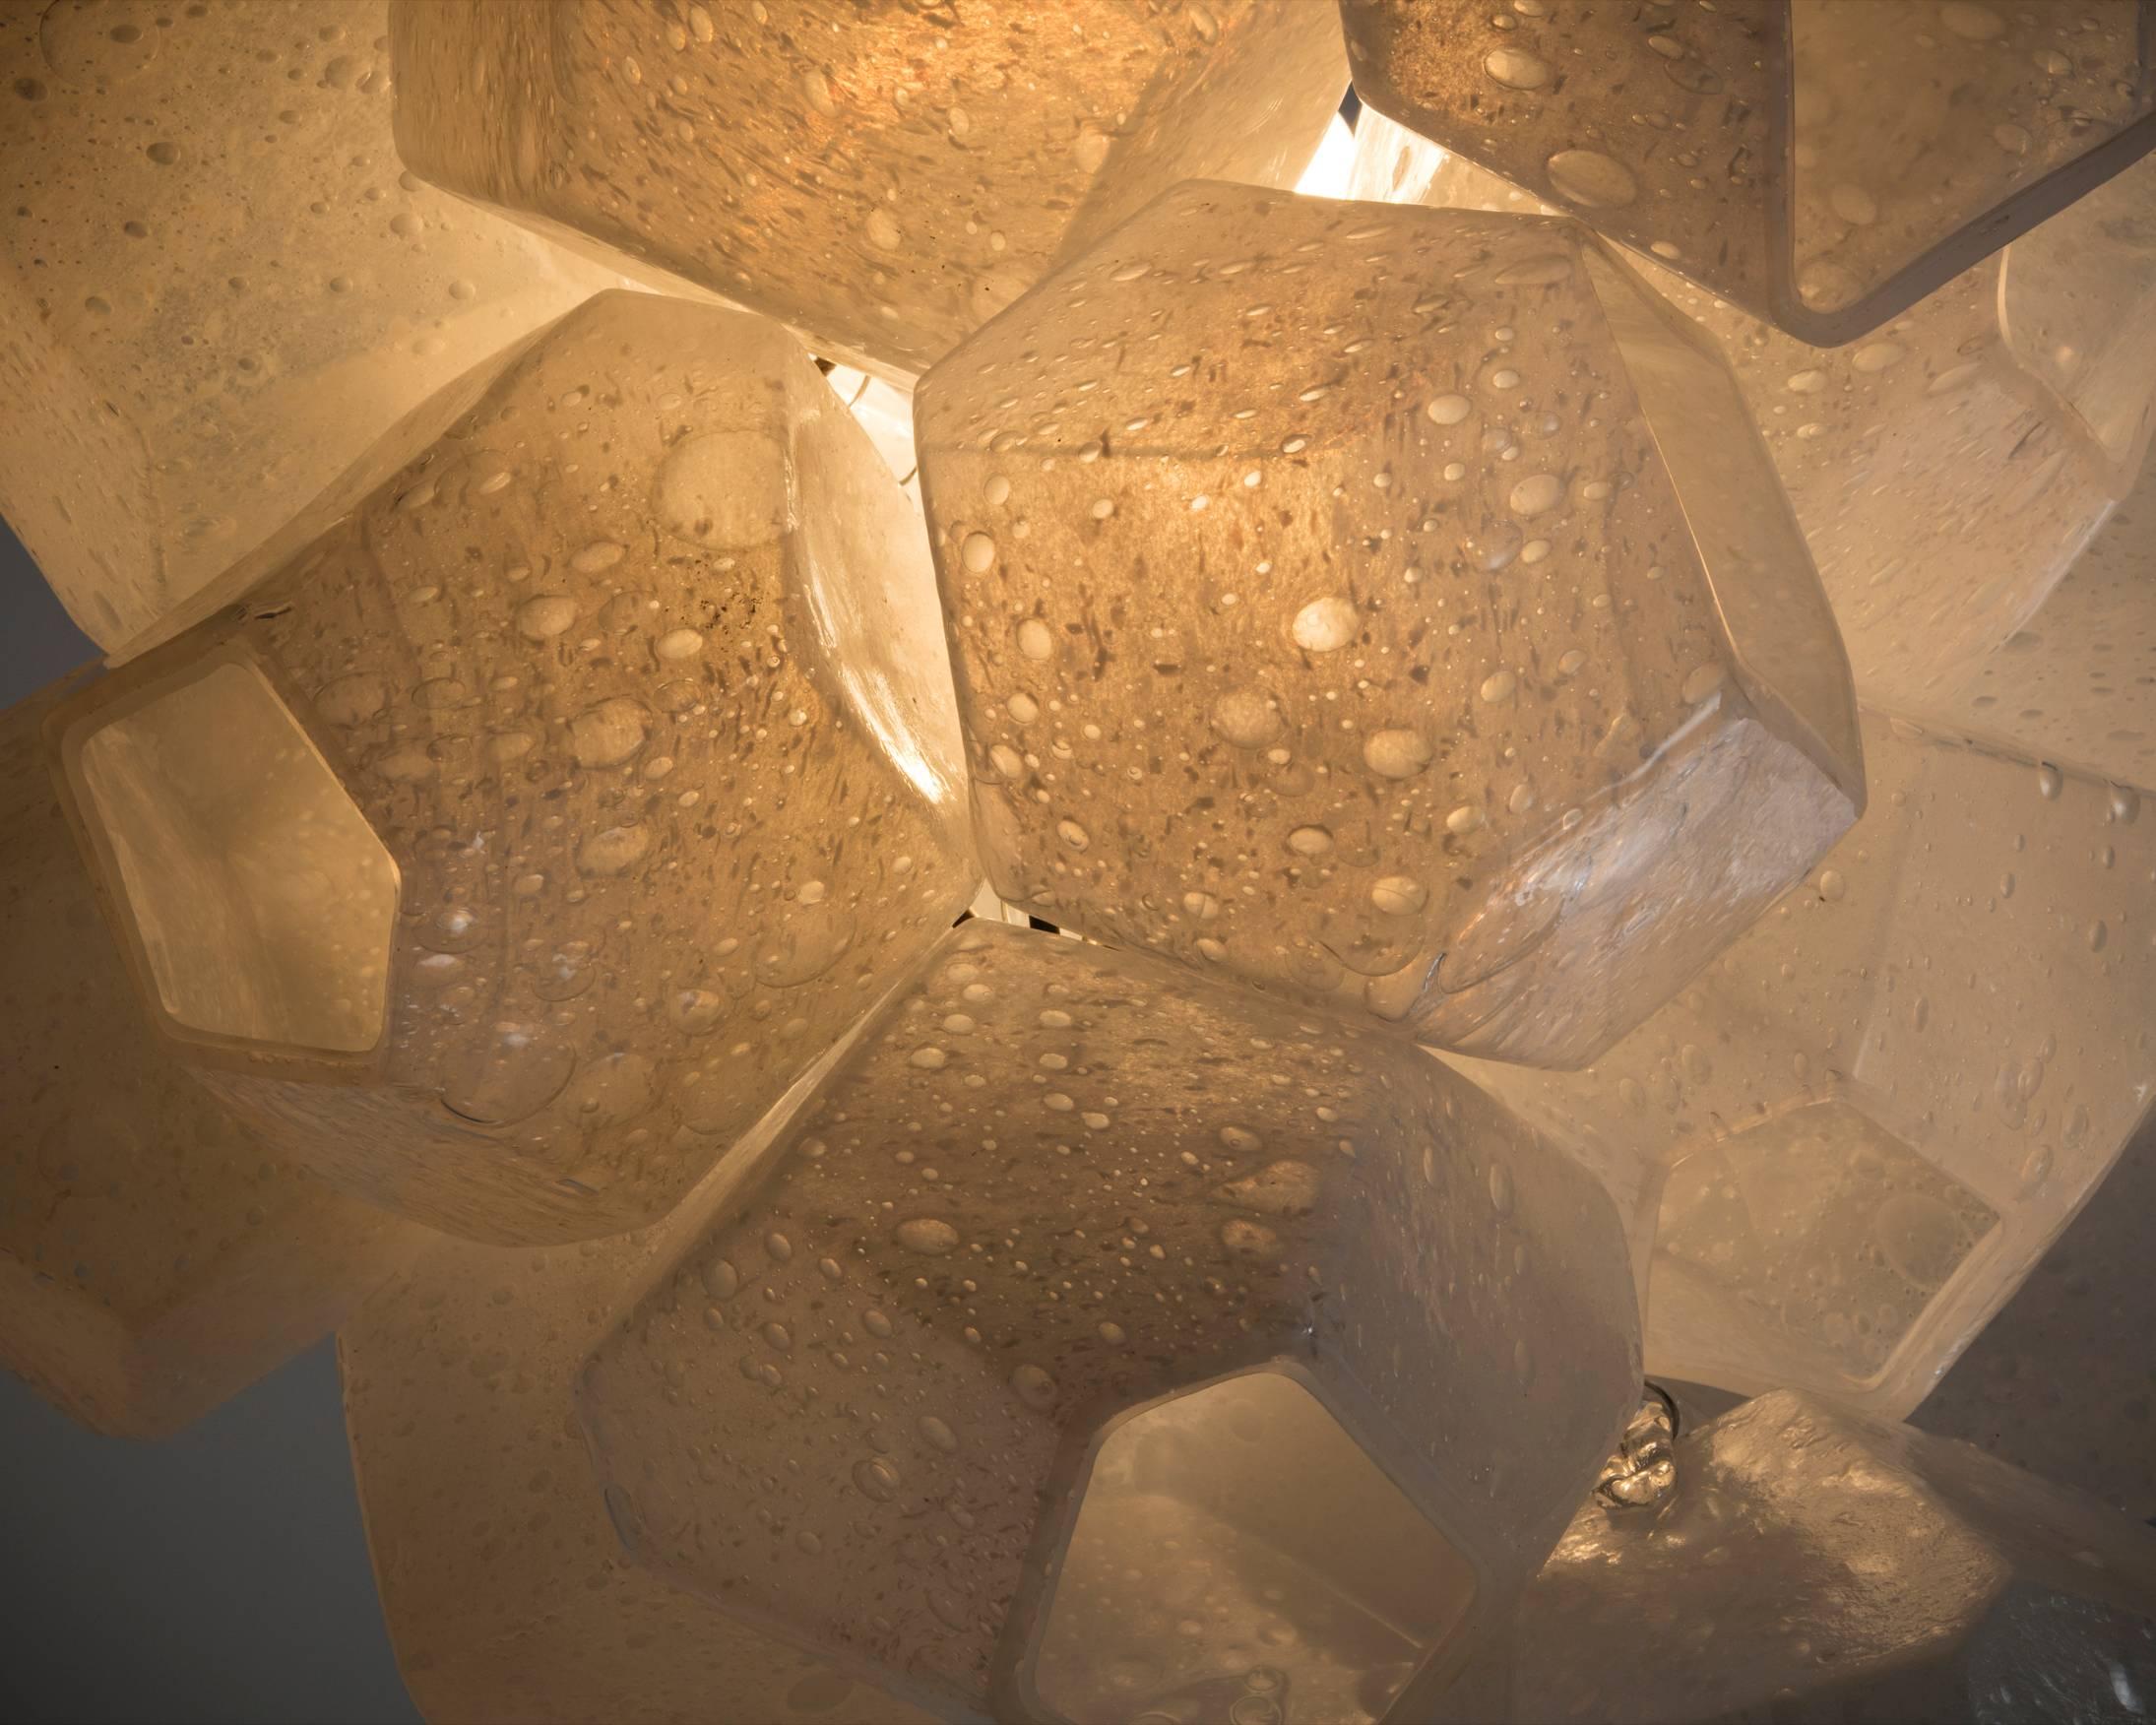 Blown Glass Illuminated Faceted Cluster Sculpture by Jeff Zimmerman, 2015